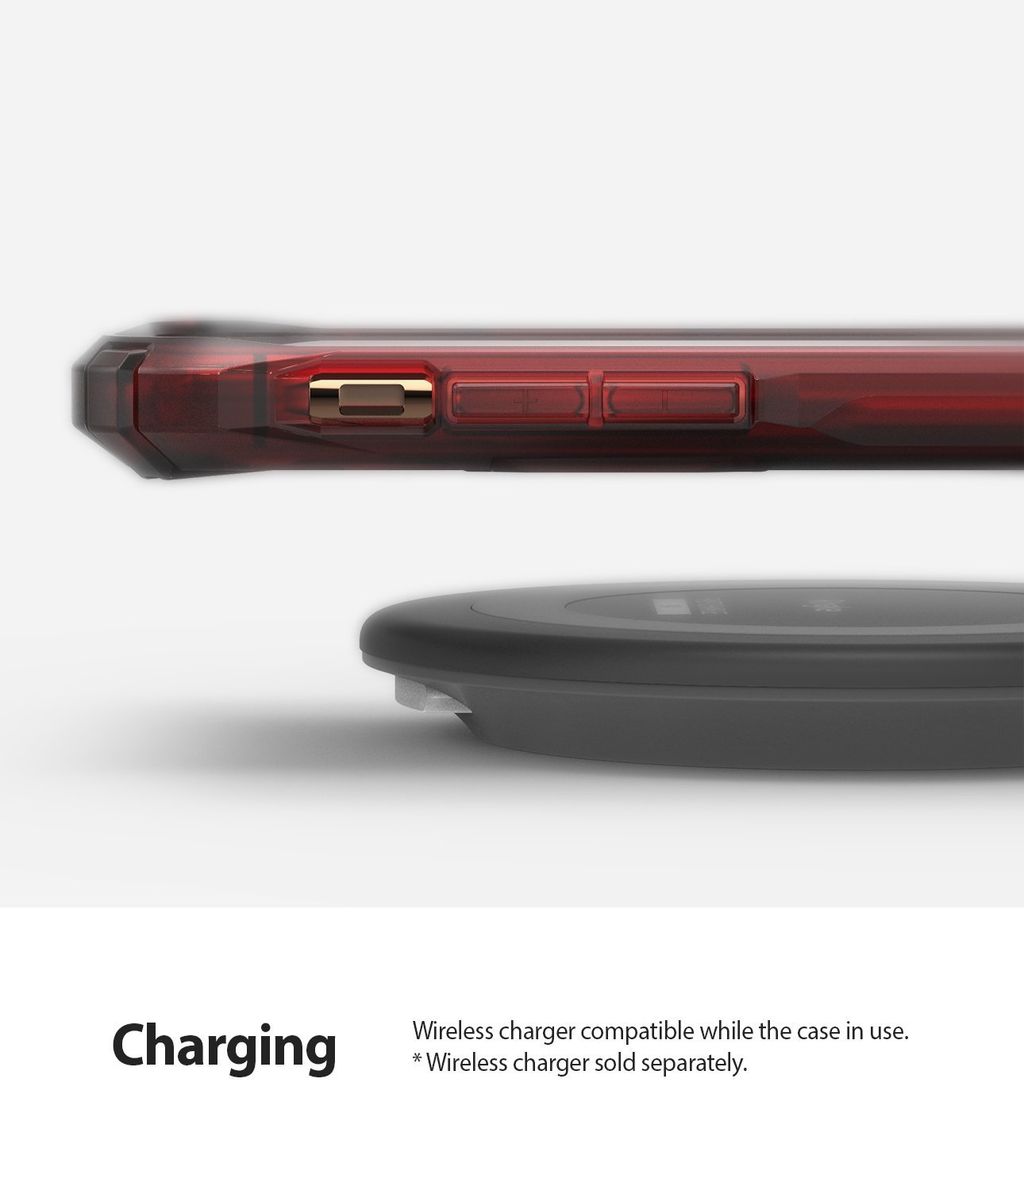 Ringke_iPhone_11_Pro_FusionX_sub_thum_Ruby_Red_Wireless_Charger_1400x.jpg